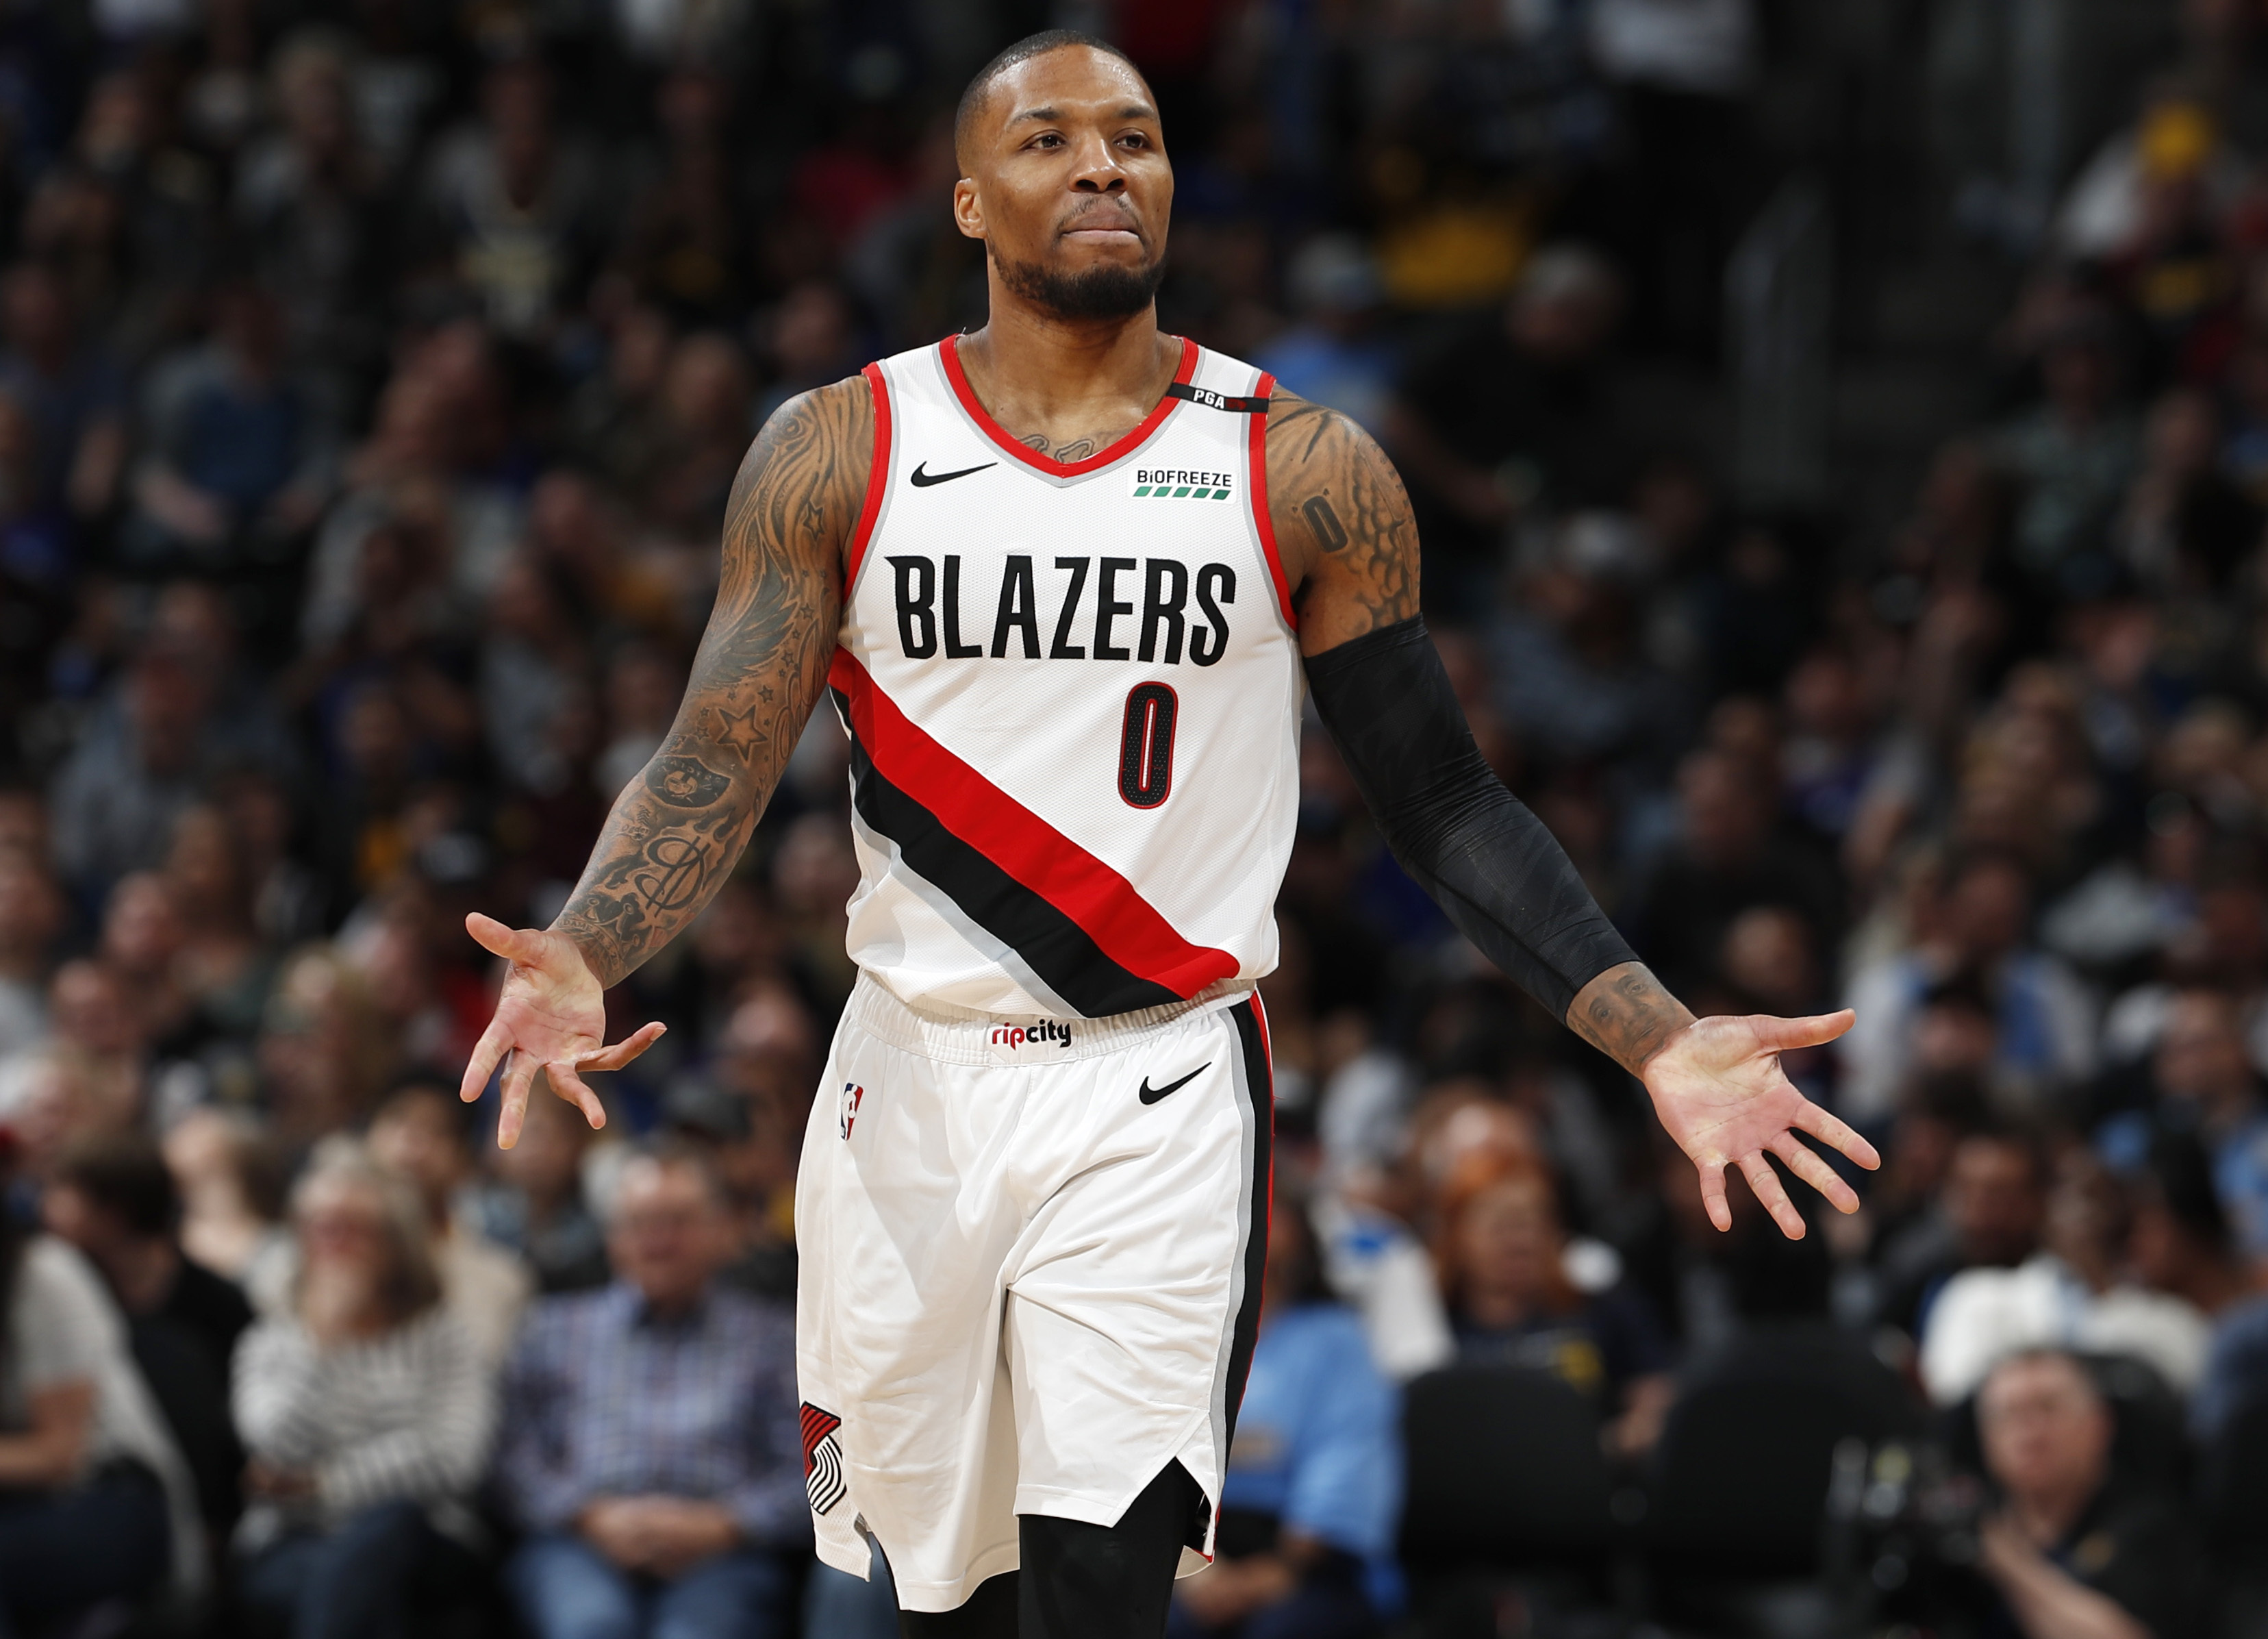 Back as a 3 seed, Portland looks to avoid another early exit